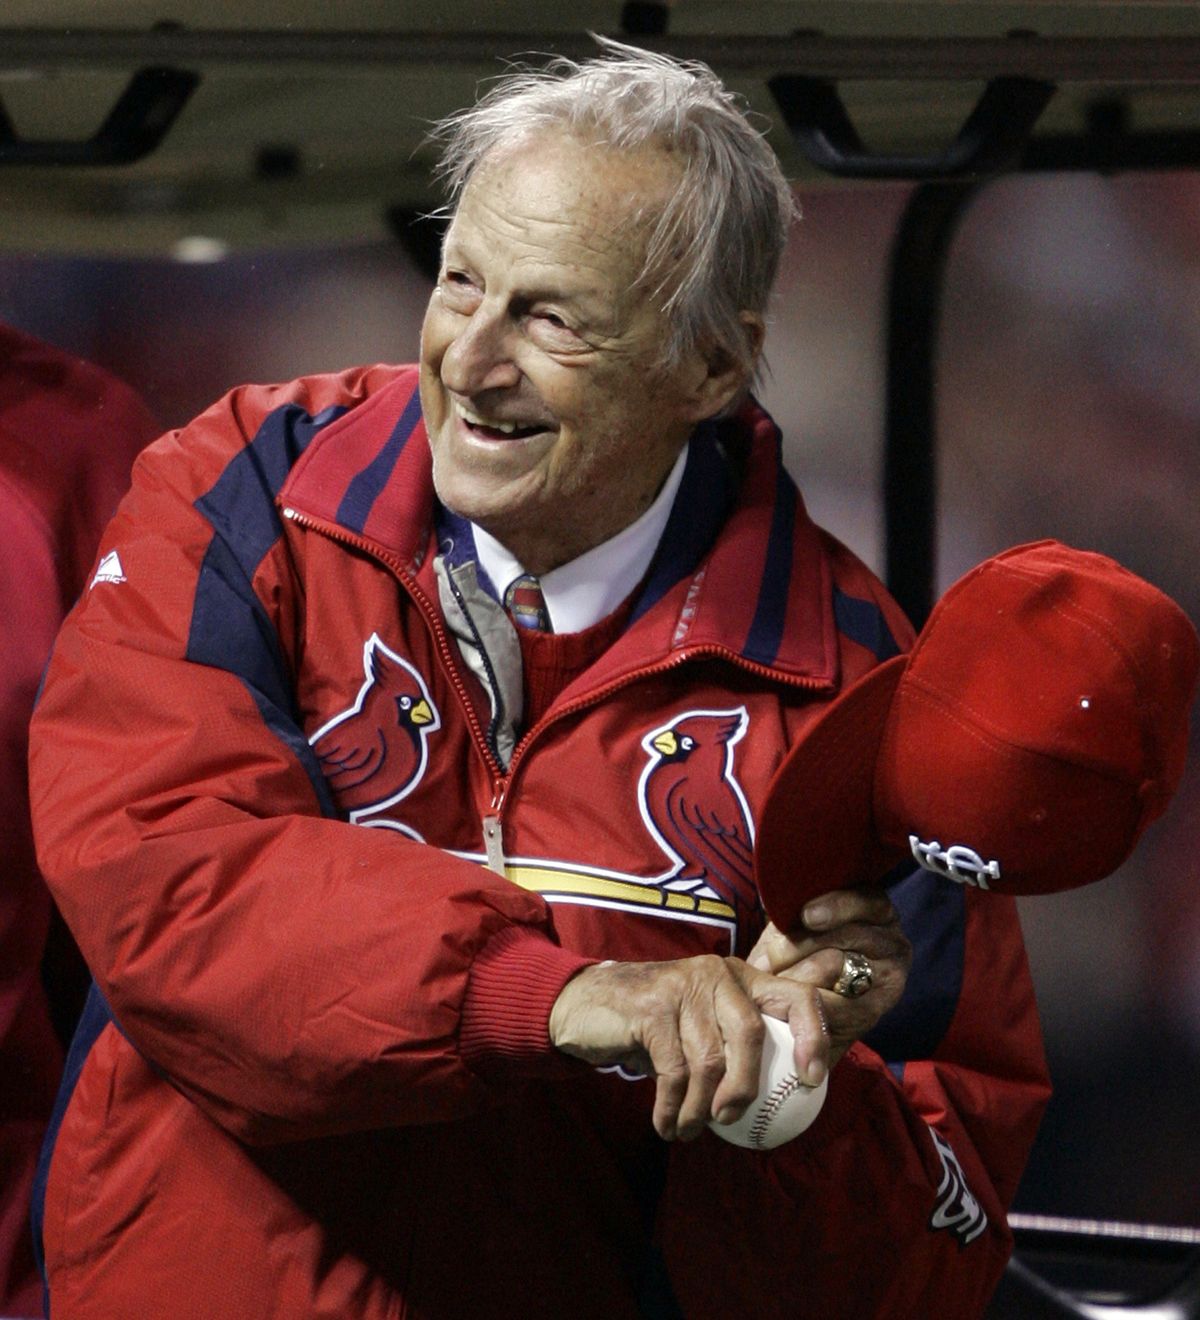 Musial (2006)